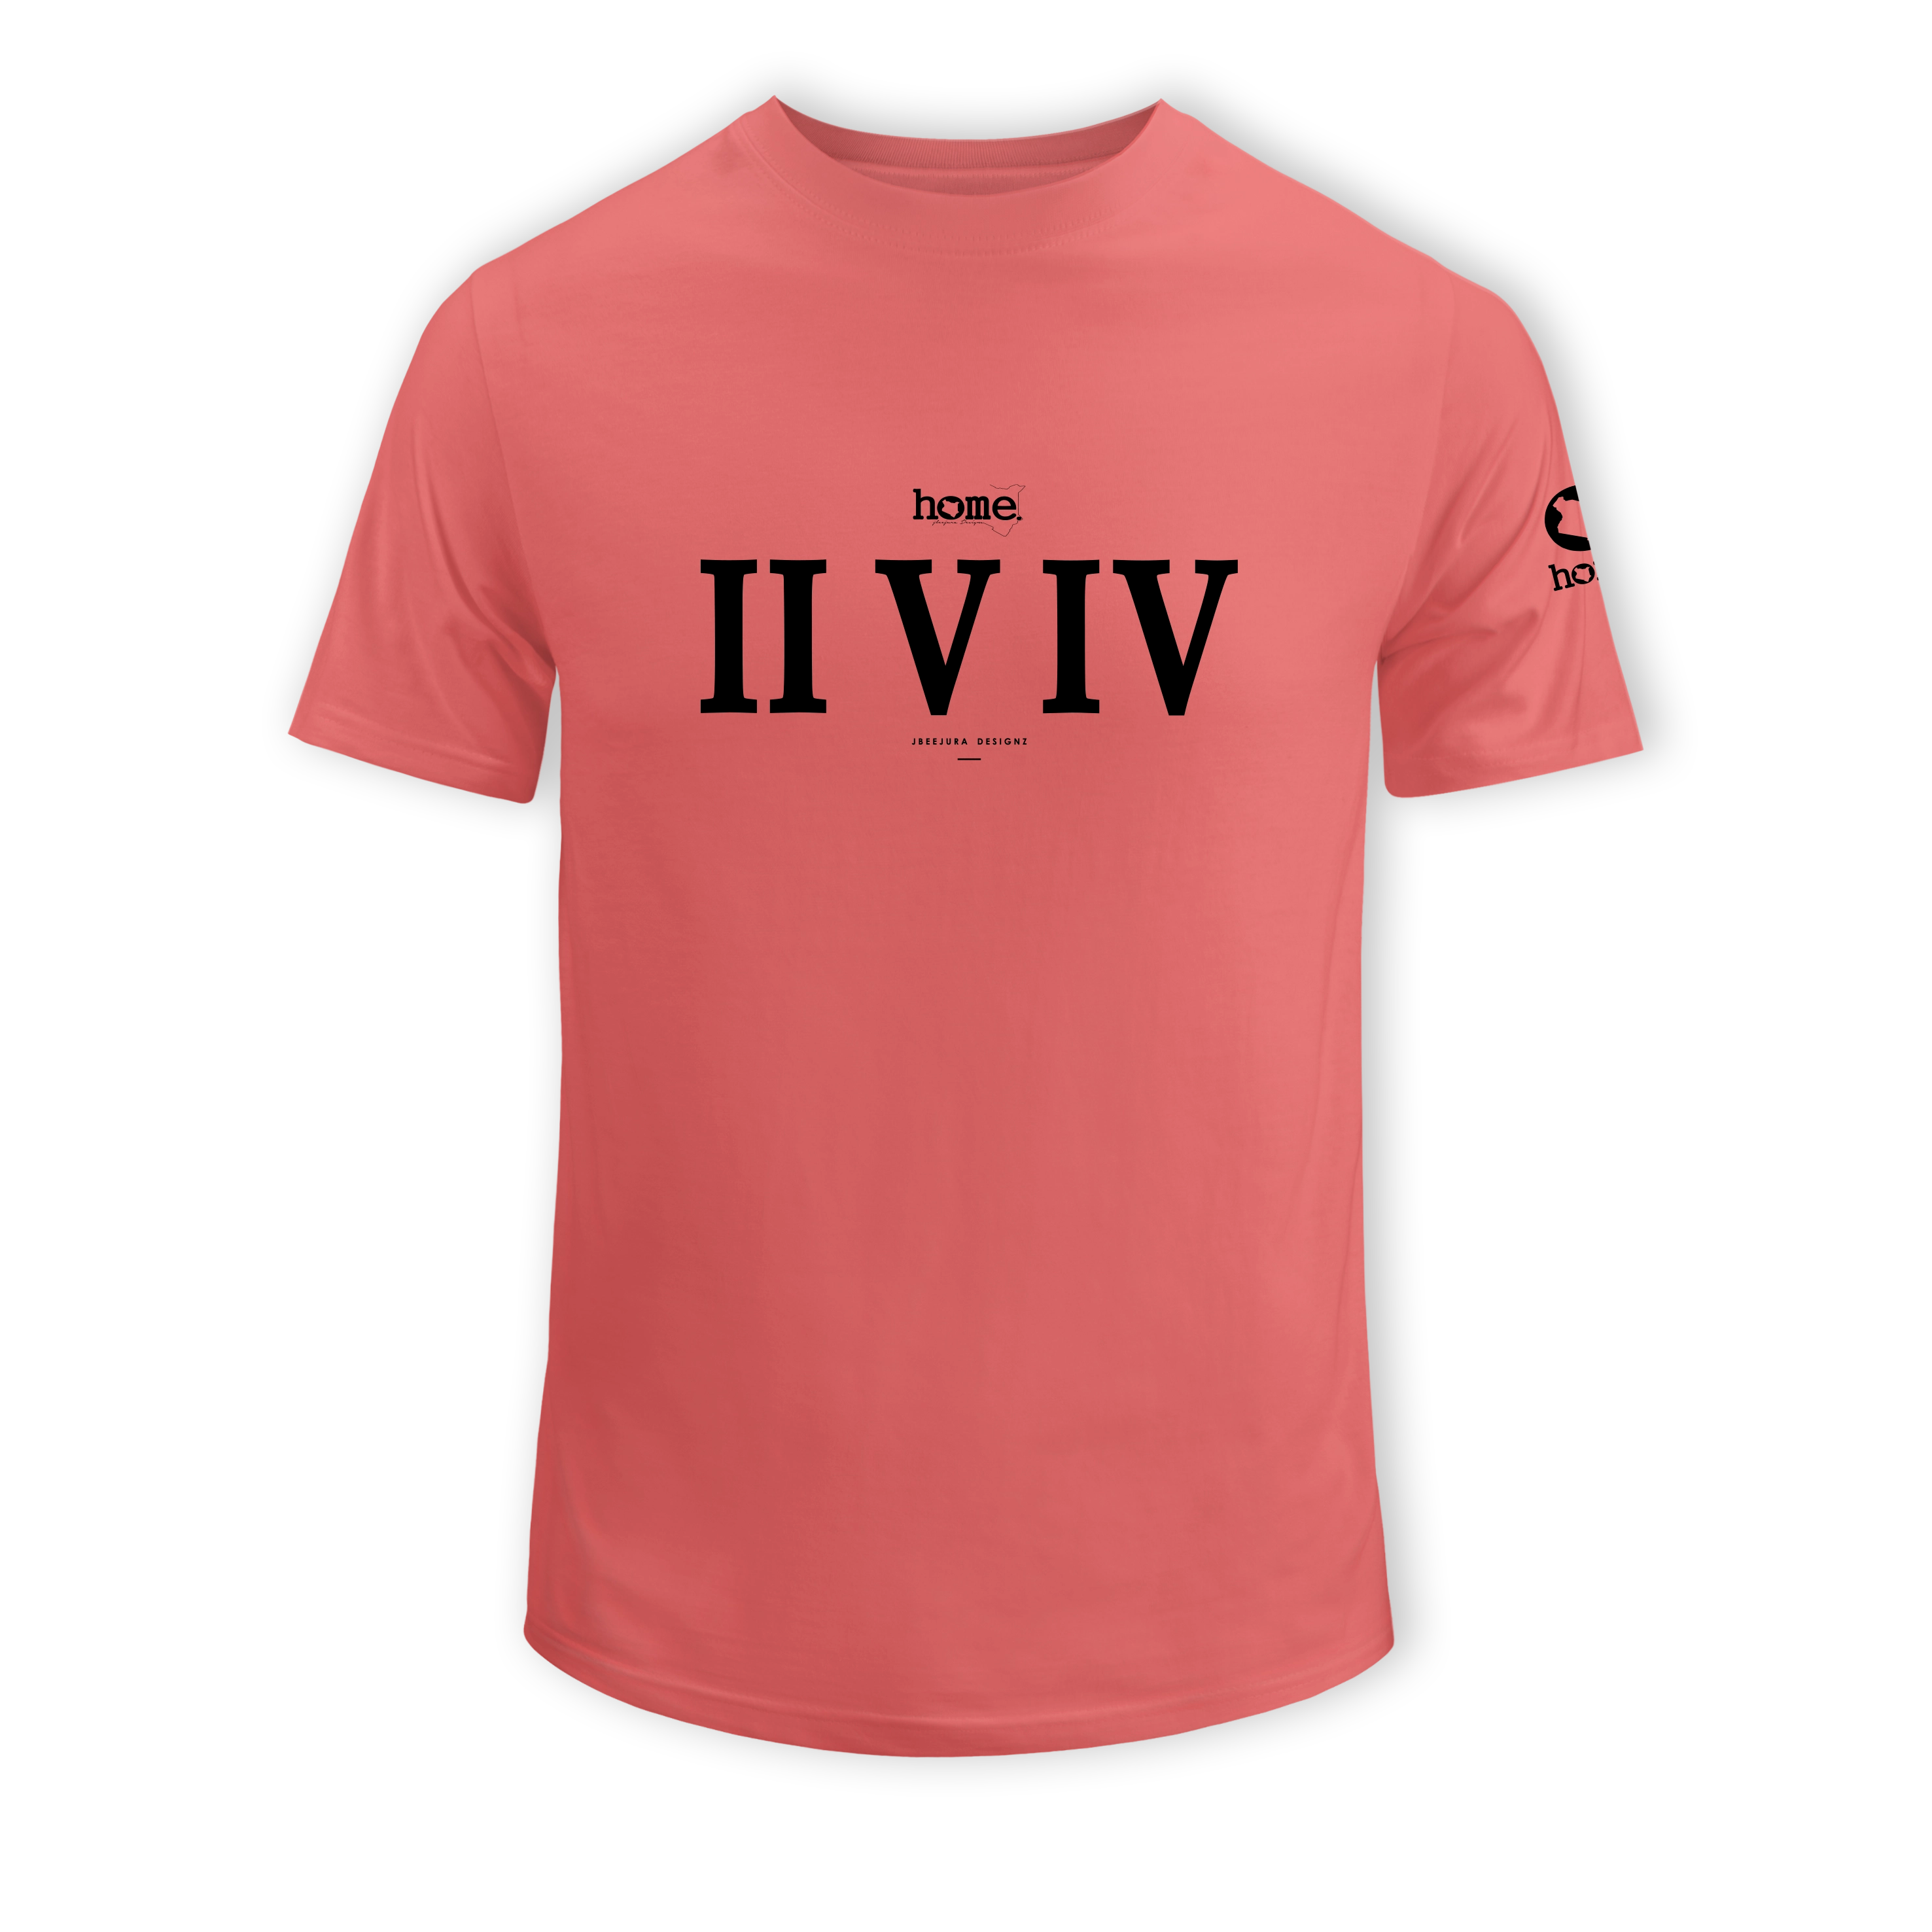 home_254 SHORT-SLEEVED MULBERRY T-SHIRT WITH A BLACK ROMAN NUMERALS PRINT – COTTON PLUS FABRIC